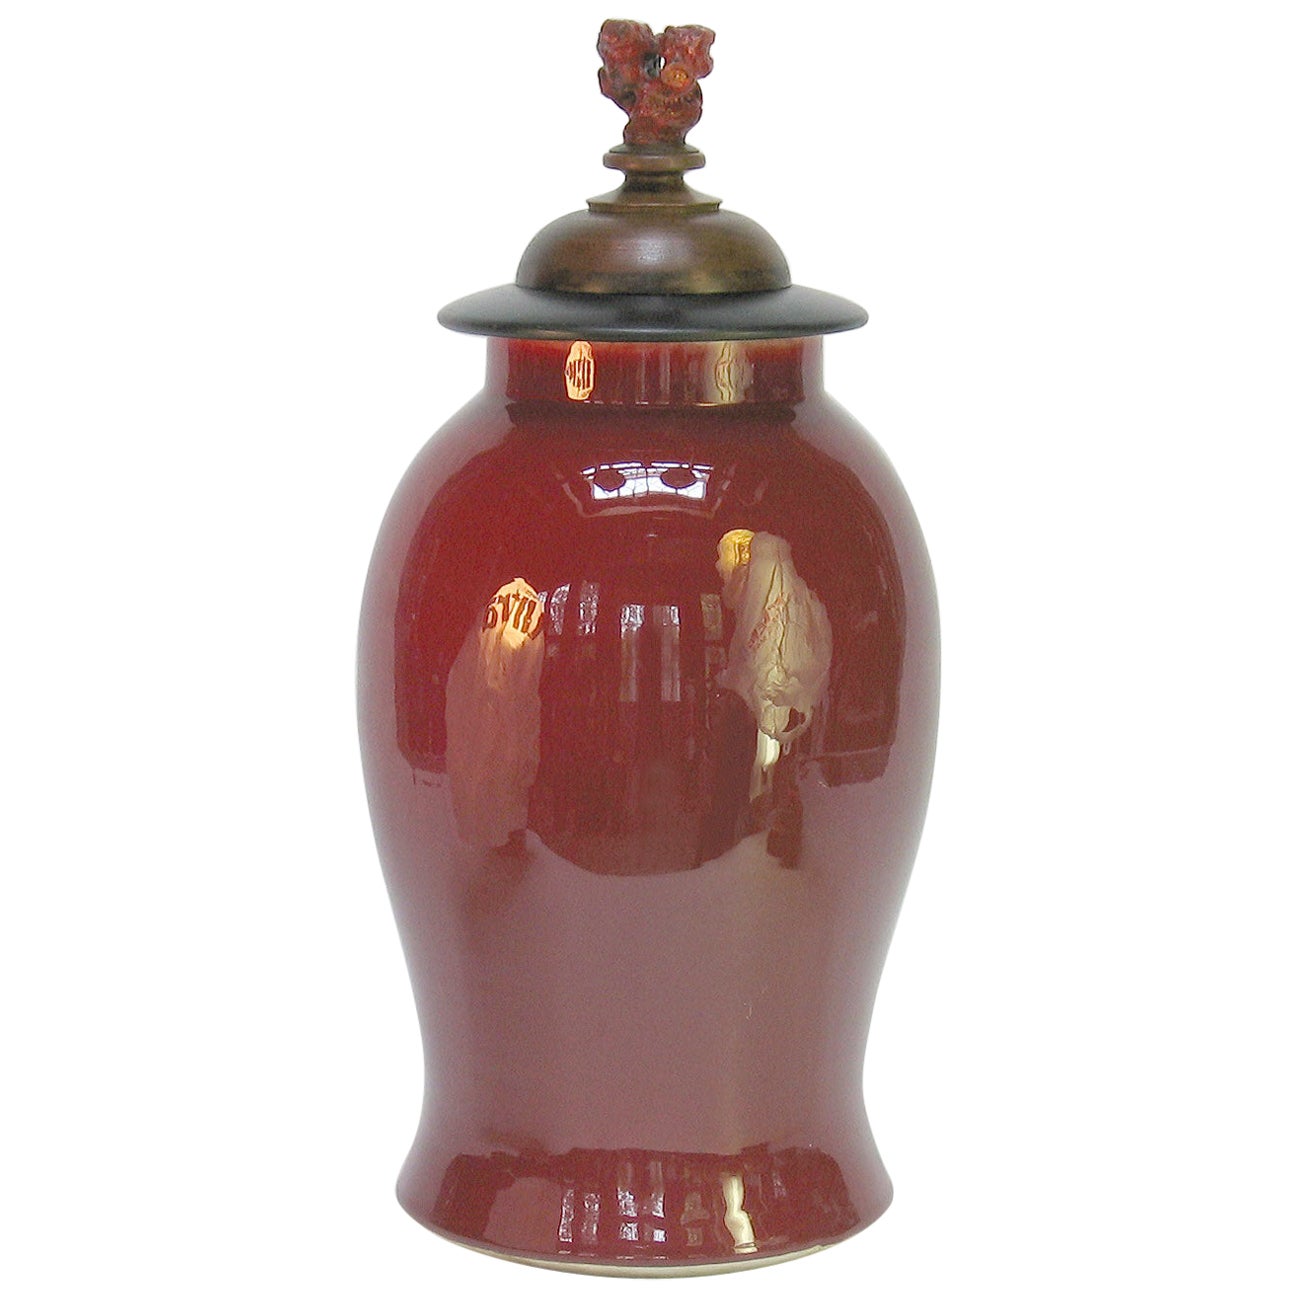 Large Chinese Porcelain Oxblood Sang-de-Boeuf Glazed Meiping Covered Jar